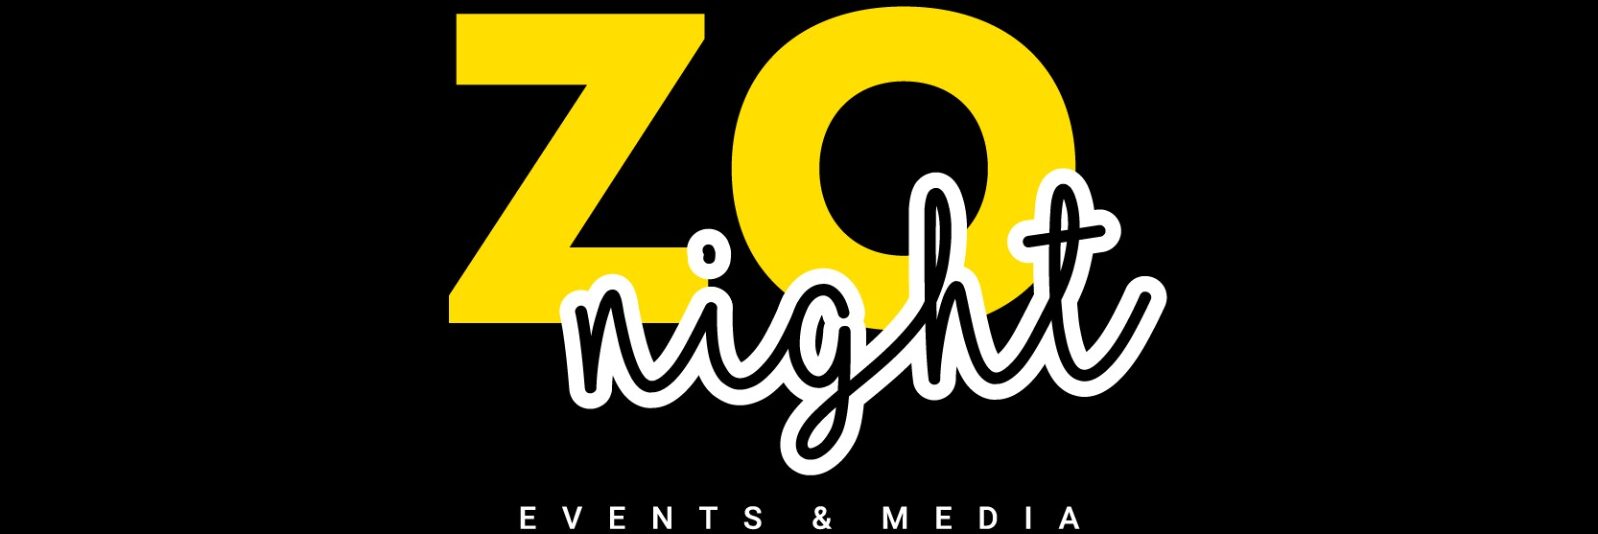 Zonight Events and Media